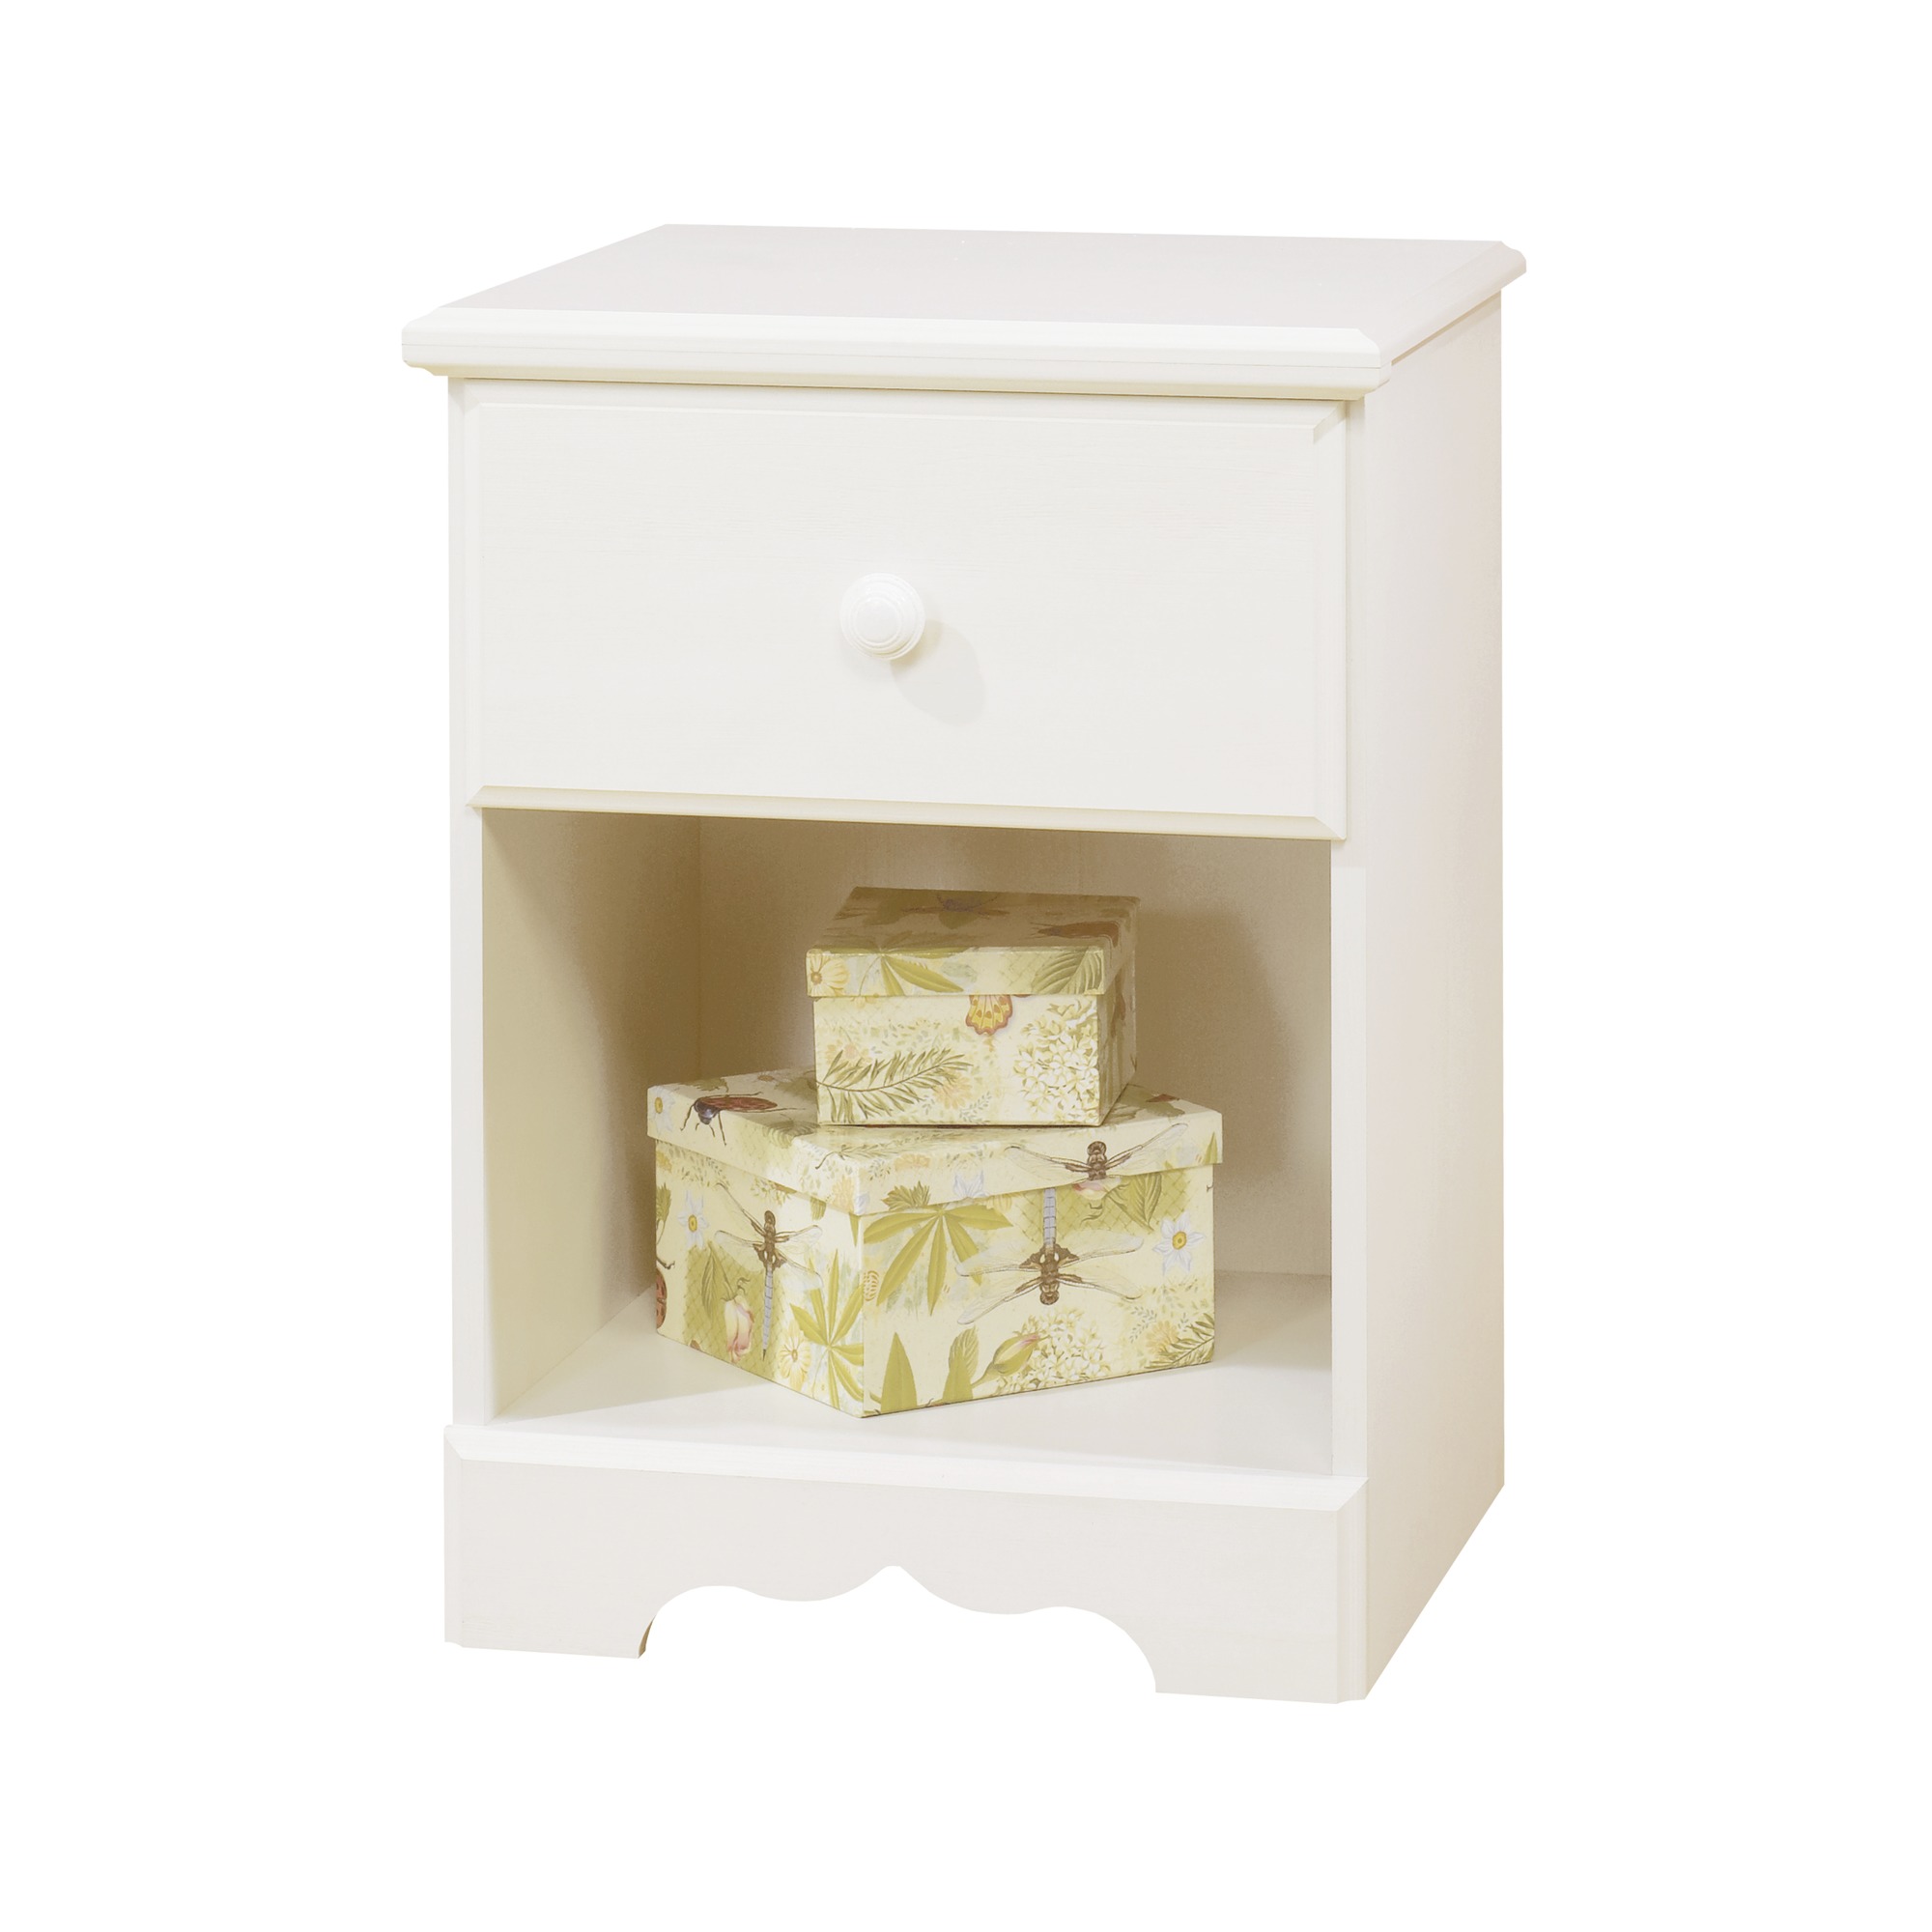 South Shore Summer Breeze Coastal 1-Drawer Nightstand with Storage, White Wash - image 1 of 8